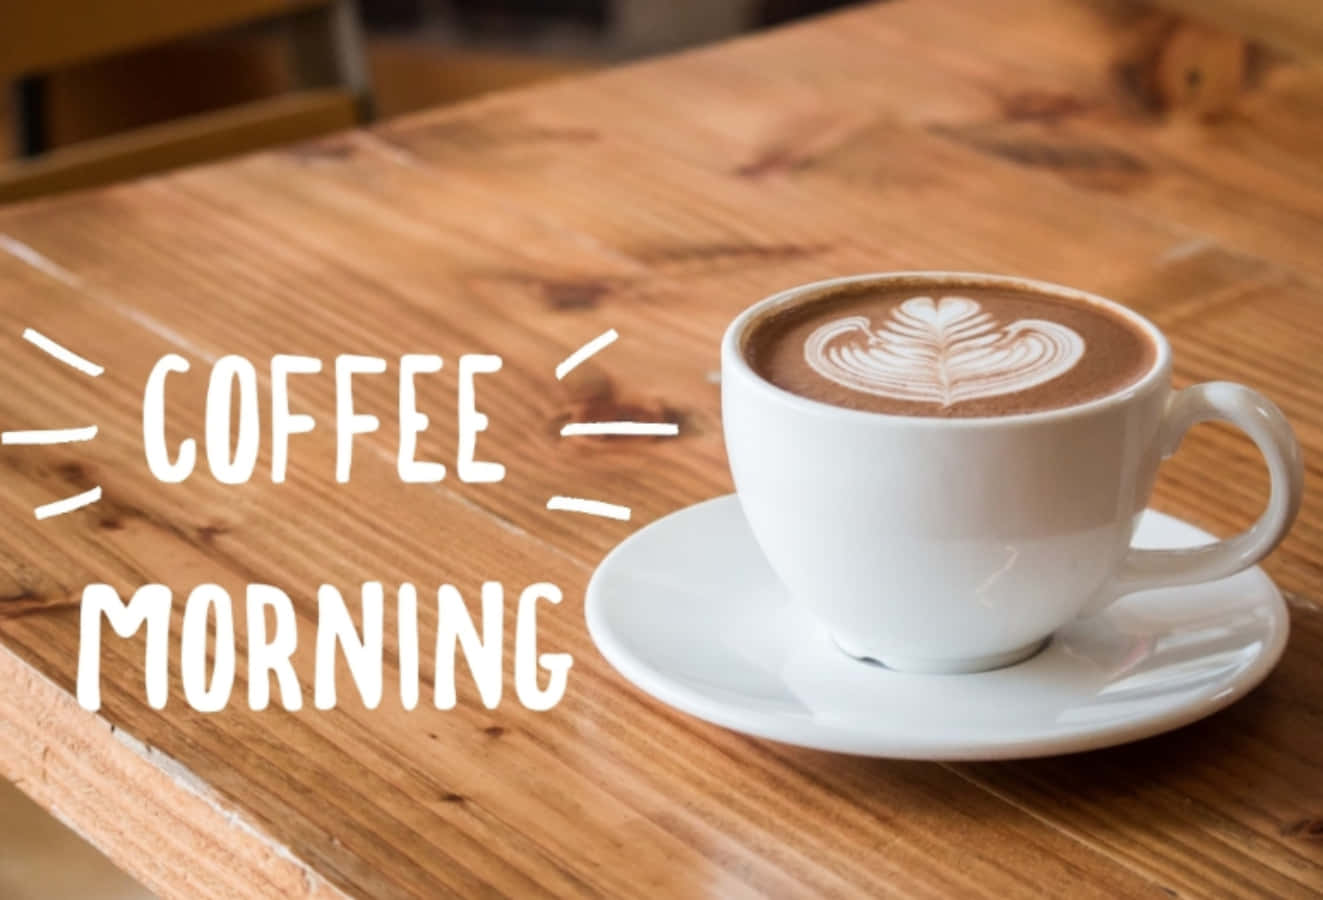 Start your morning right with a cup of delicious coffee.